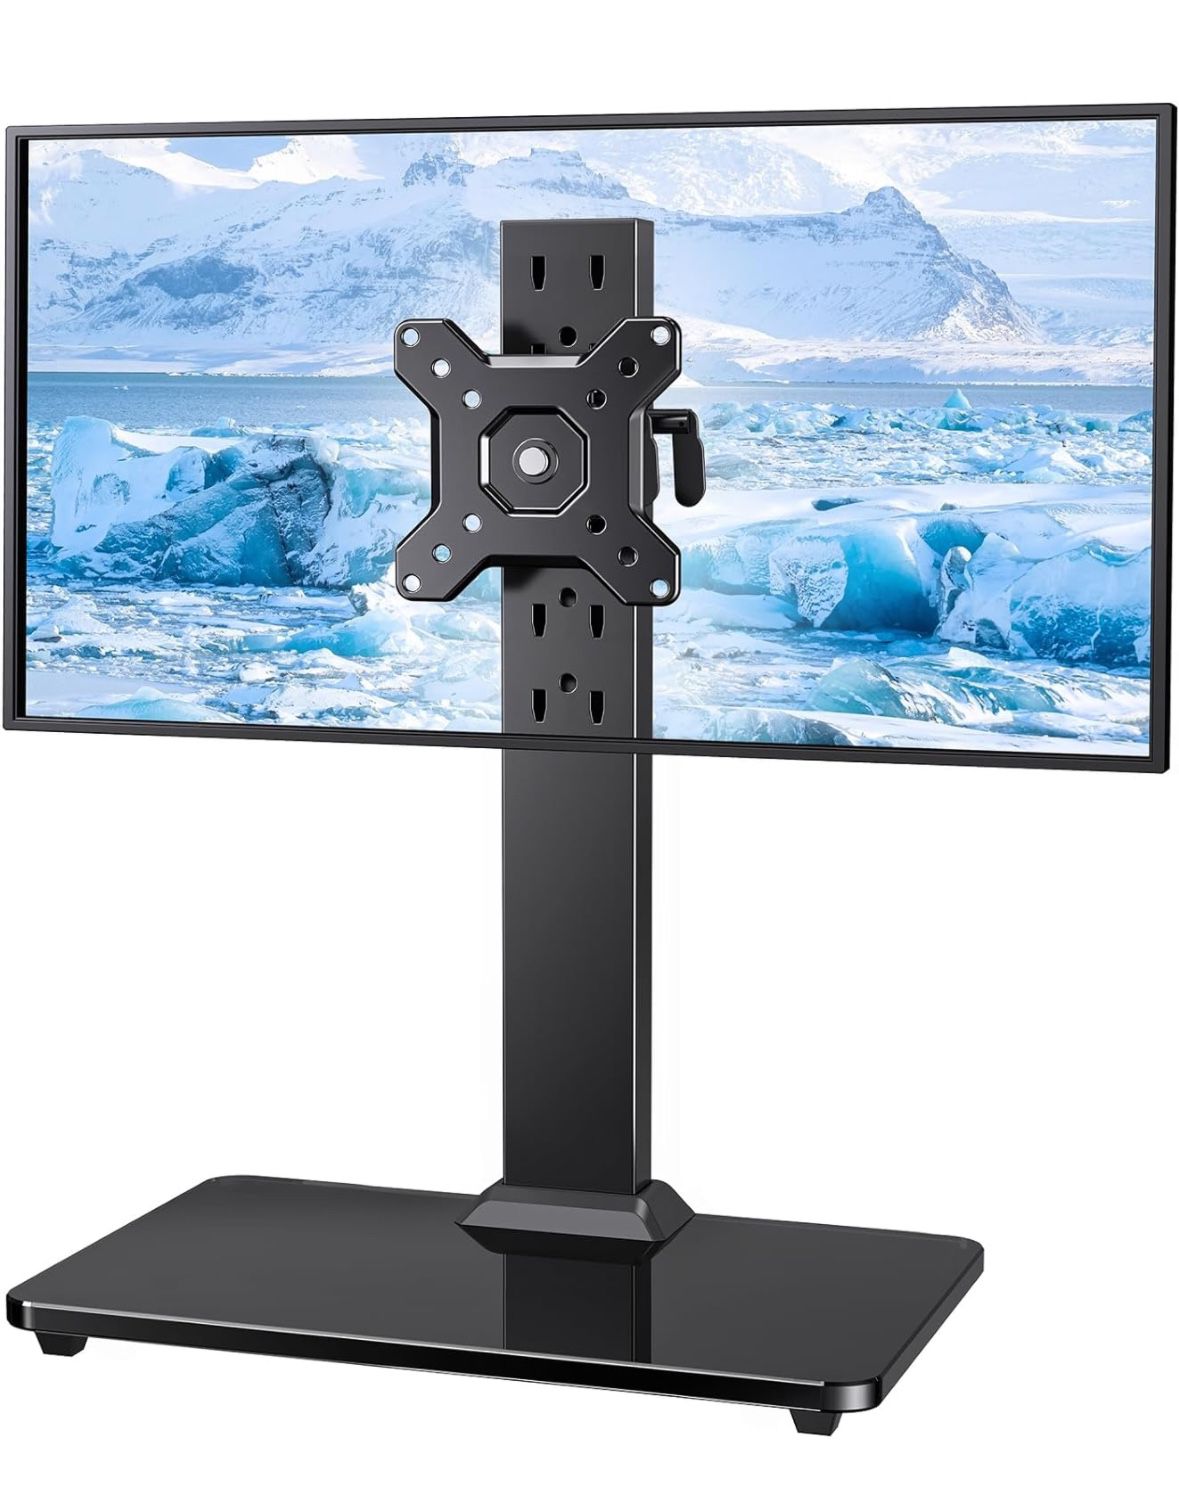 Single Monitor Stand for 13-34 inch Screens up to 44 lbs, Free-Standing Monitor Riser